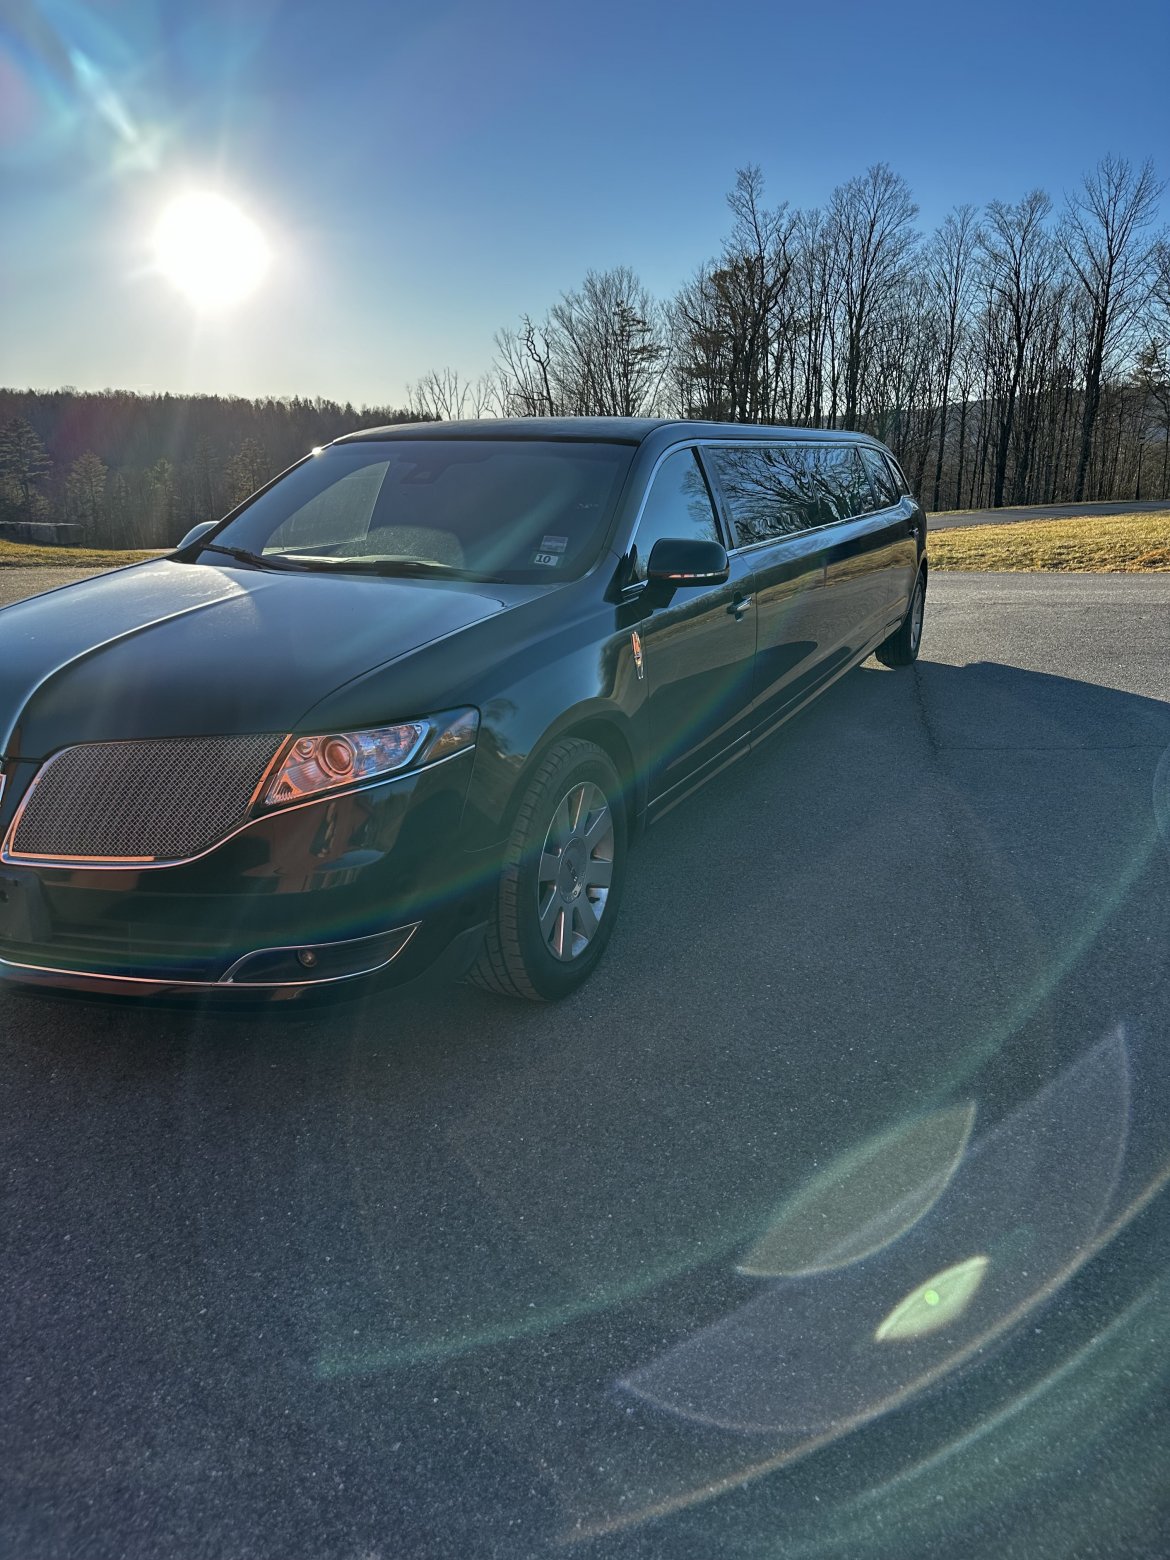 Limousine for sale: 2015 Lincoln MKT by Tiffany